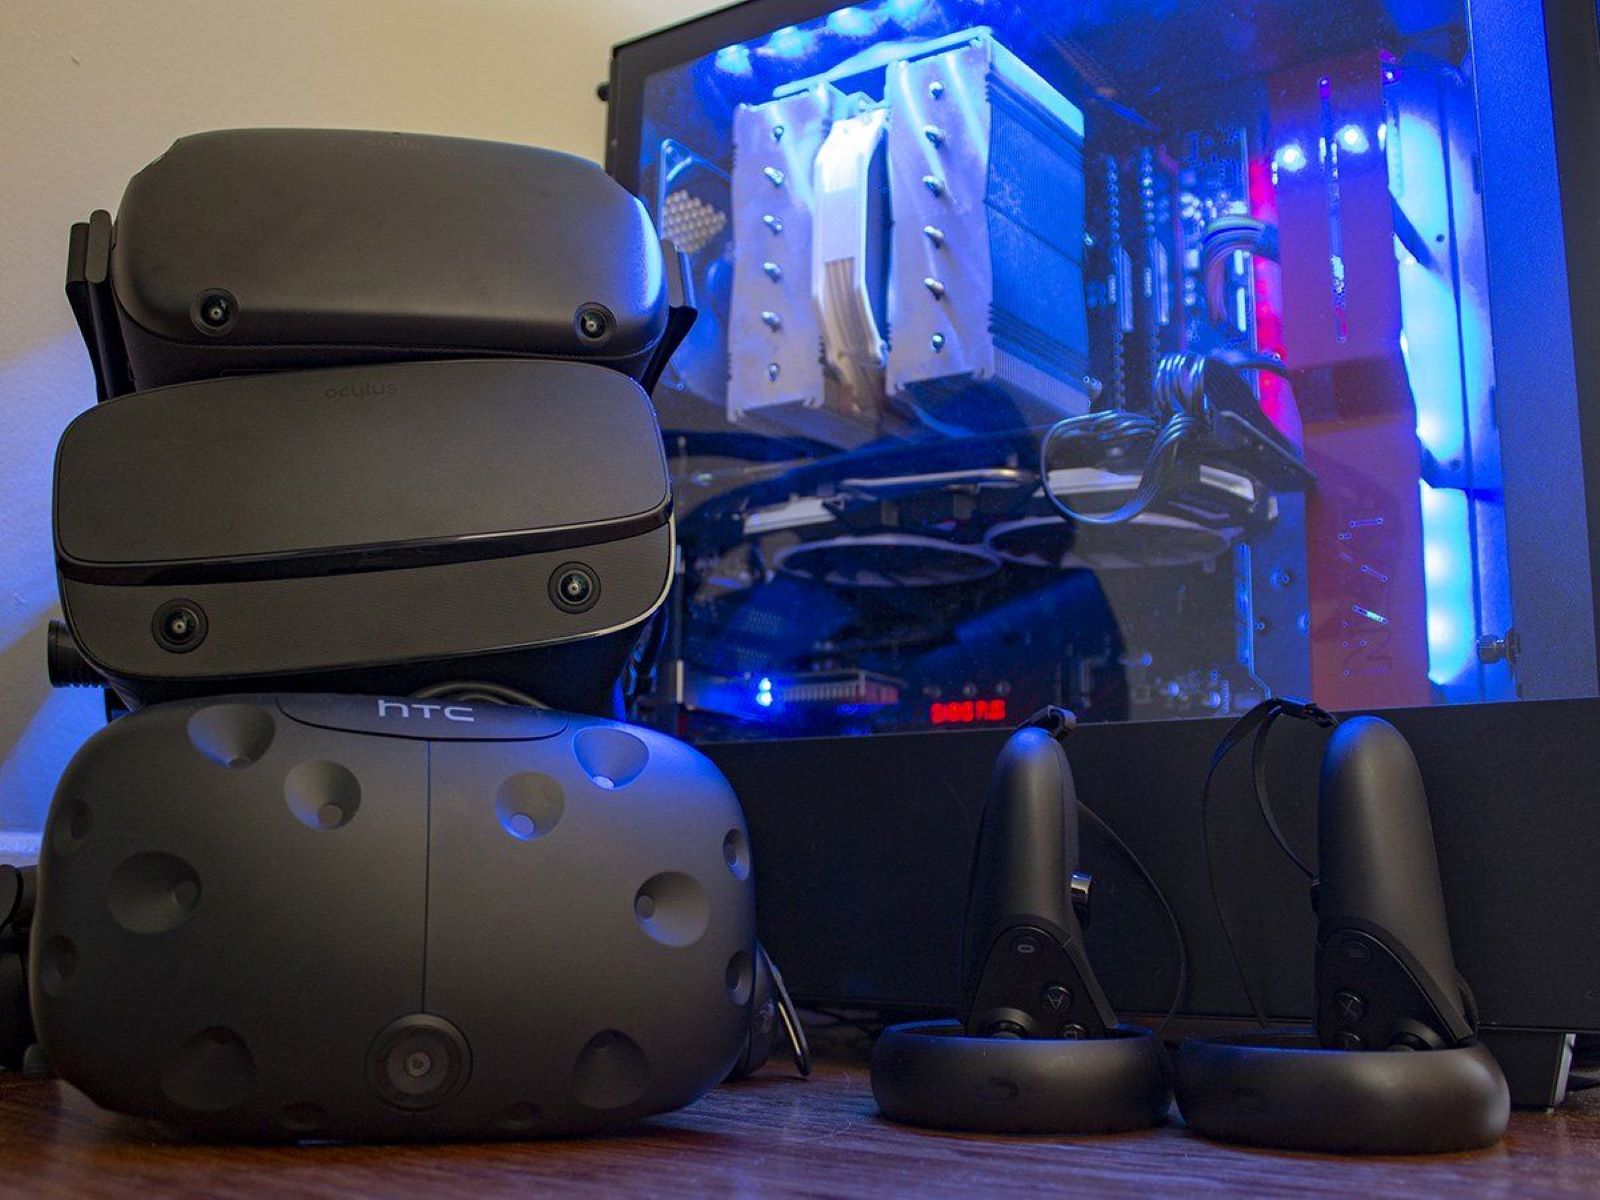 what-pc-works-best-with-htc-vive